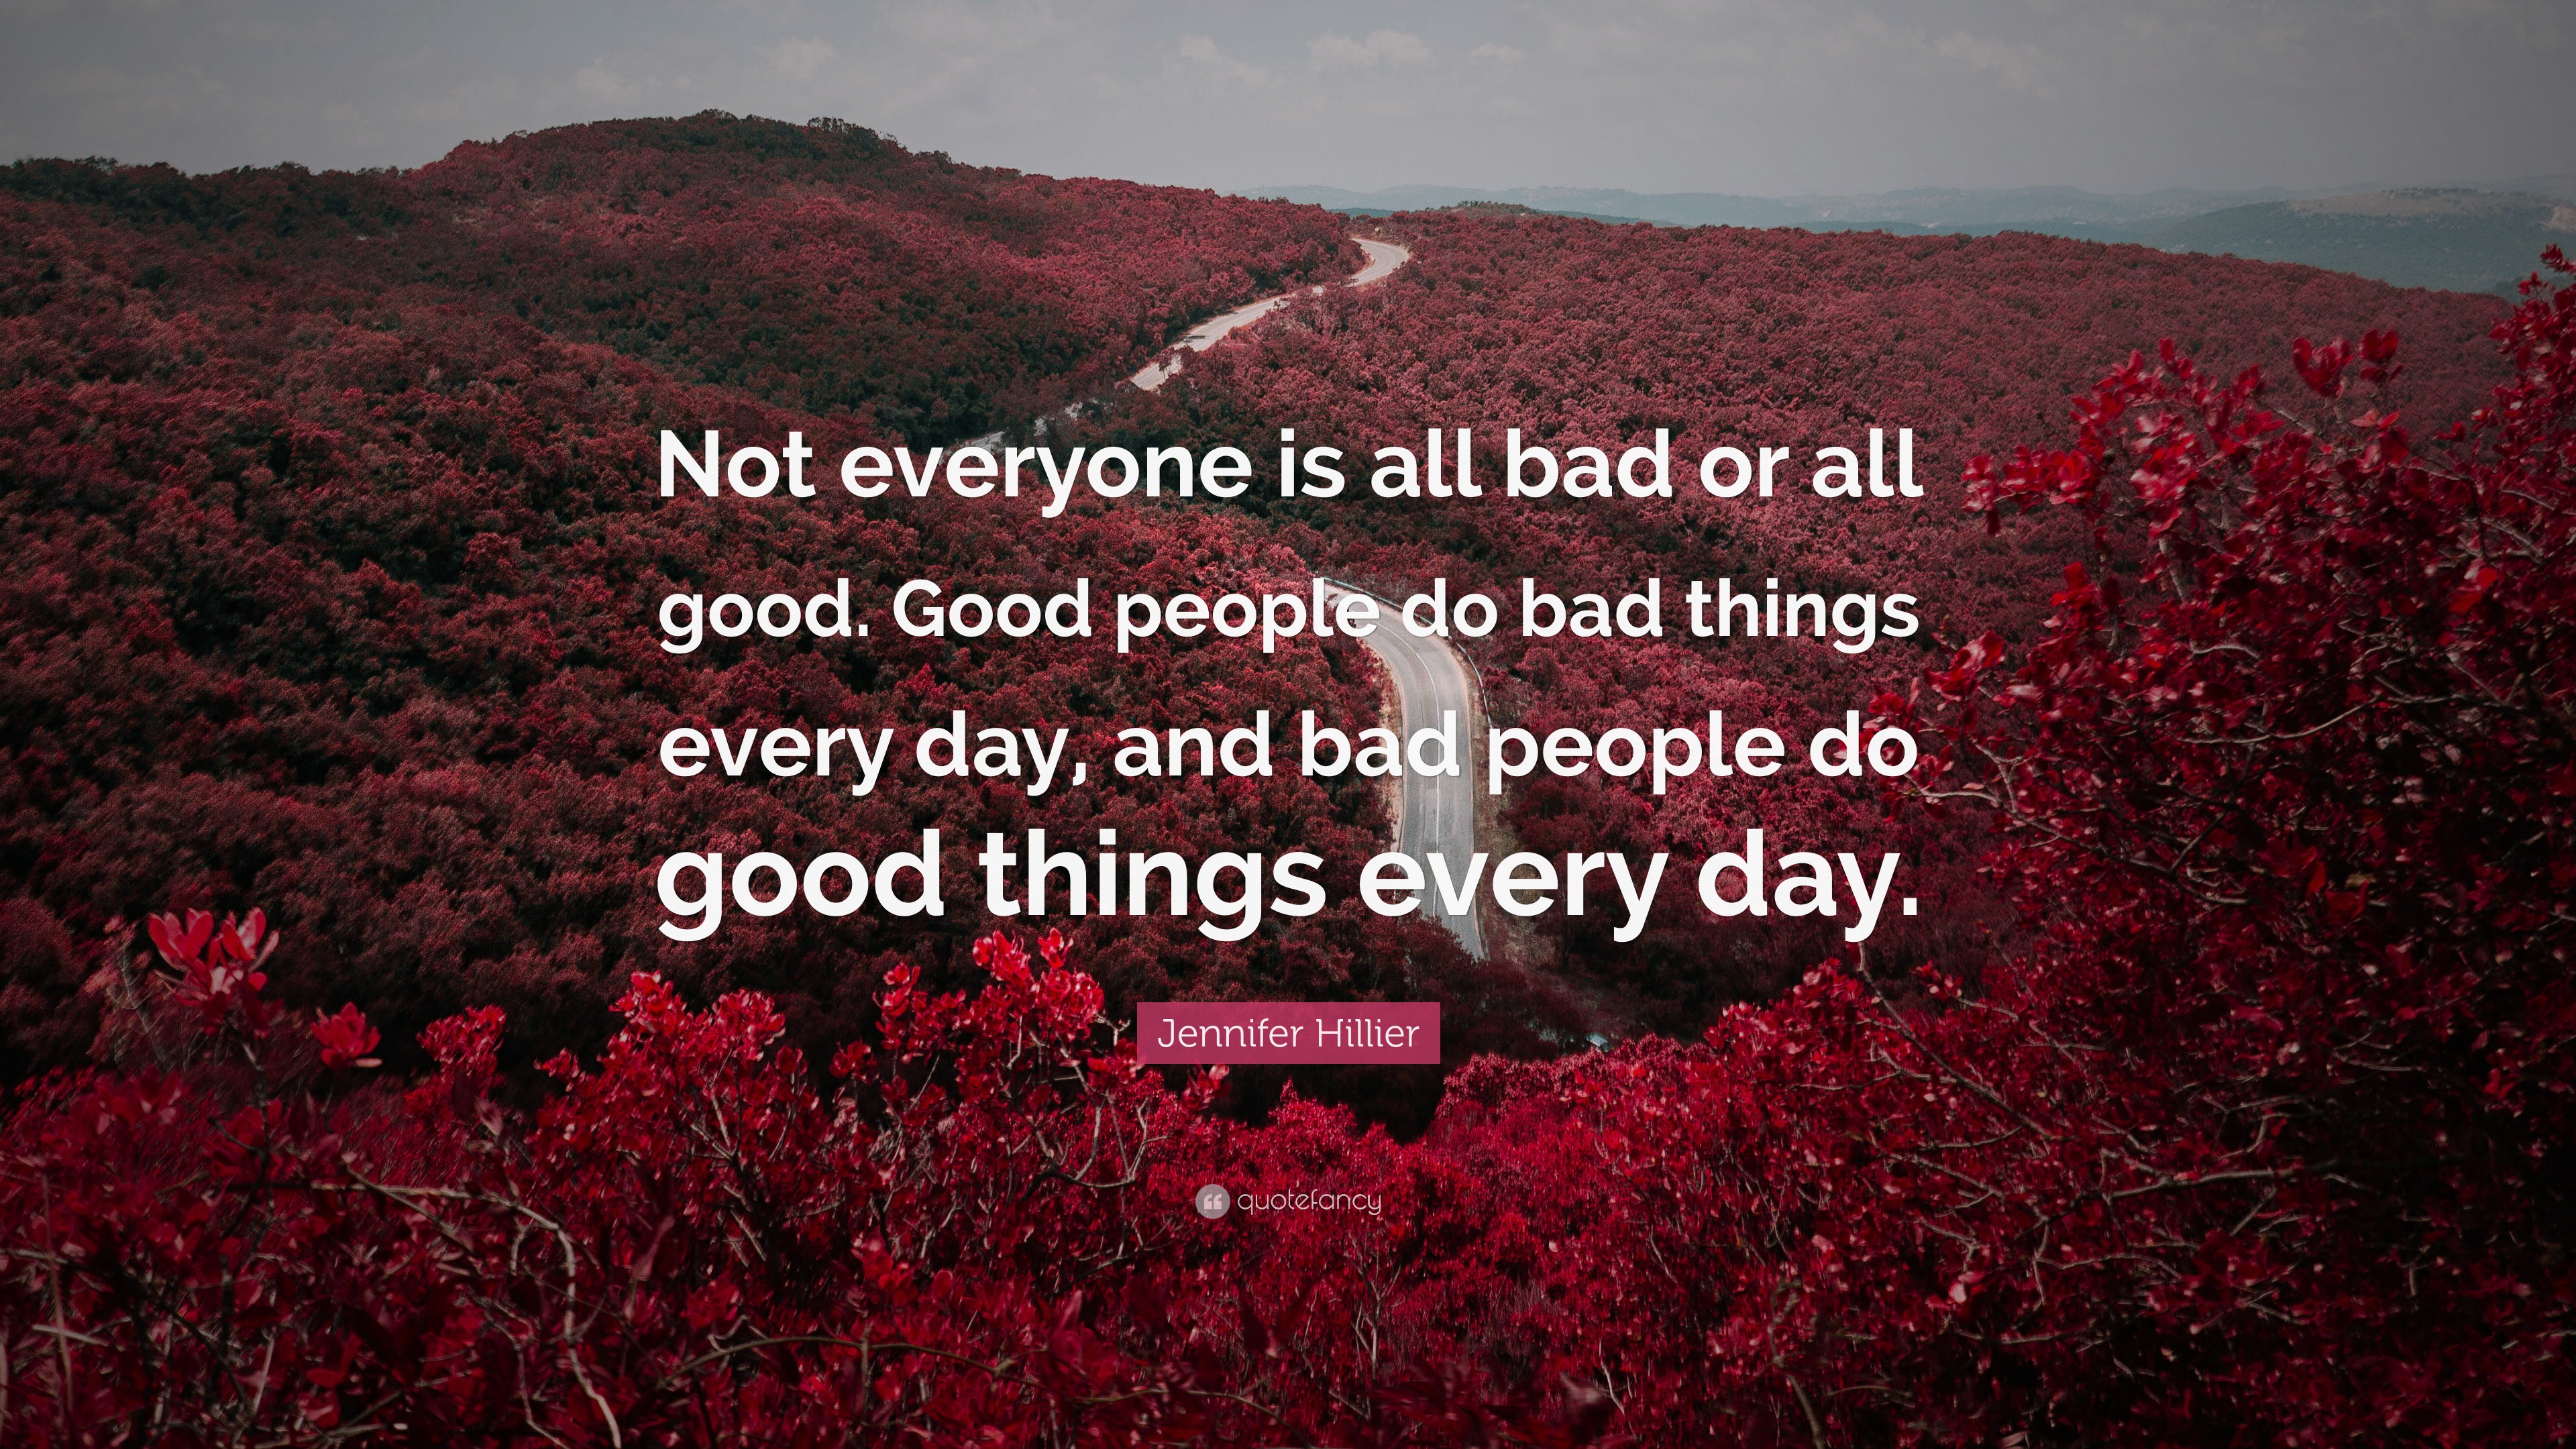 Jennifer Hillier Quote: “Not everyone is all bad or all good. Good